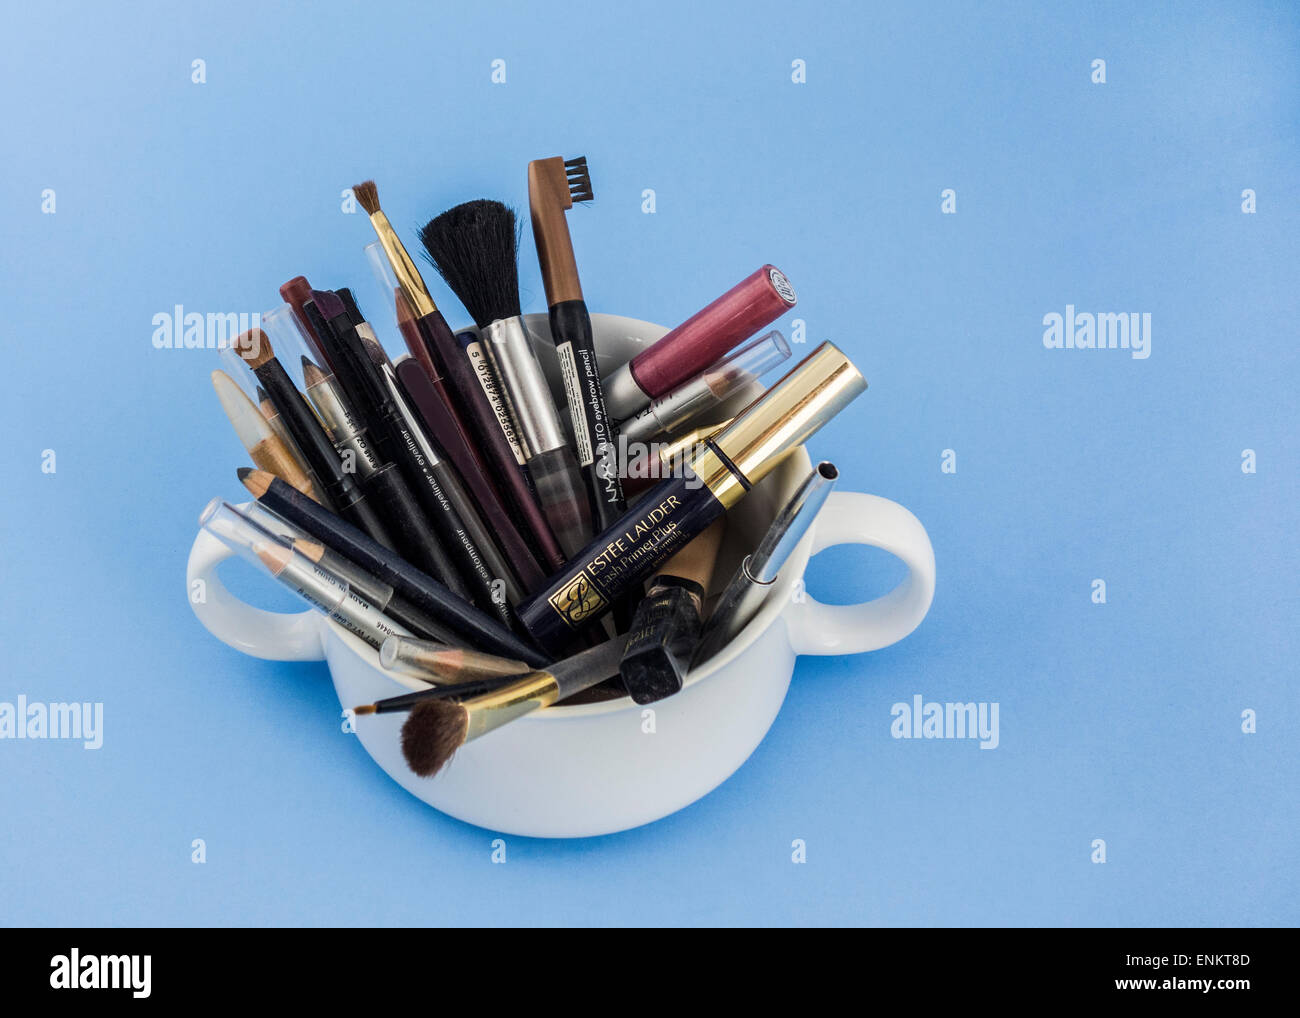 A cup holding many well-used applicator brushes and eye makeup. Isolated on blue. Stock Photo